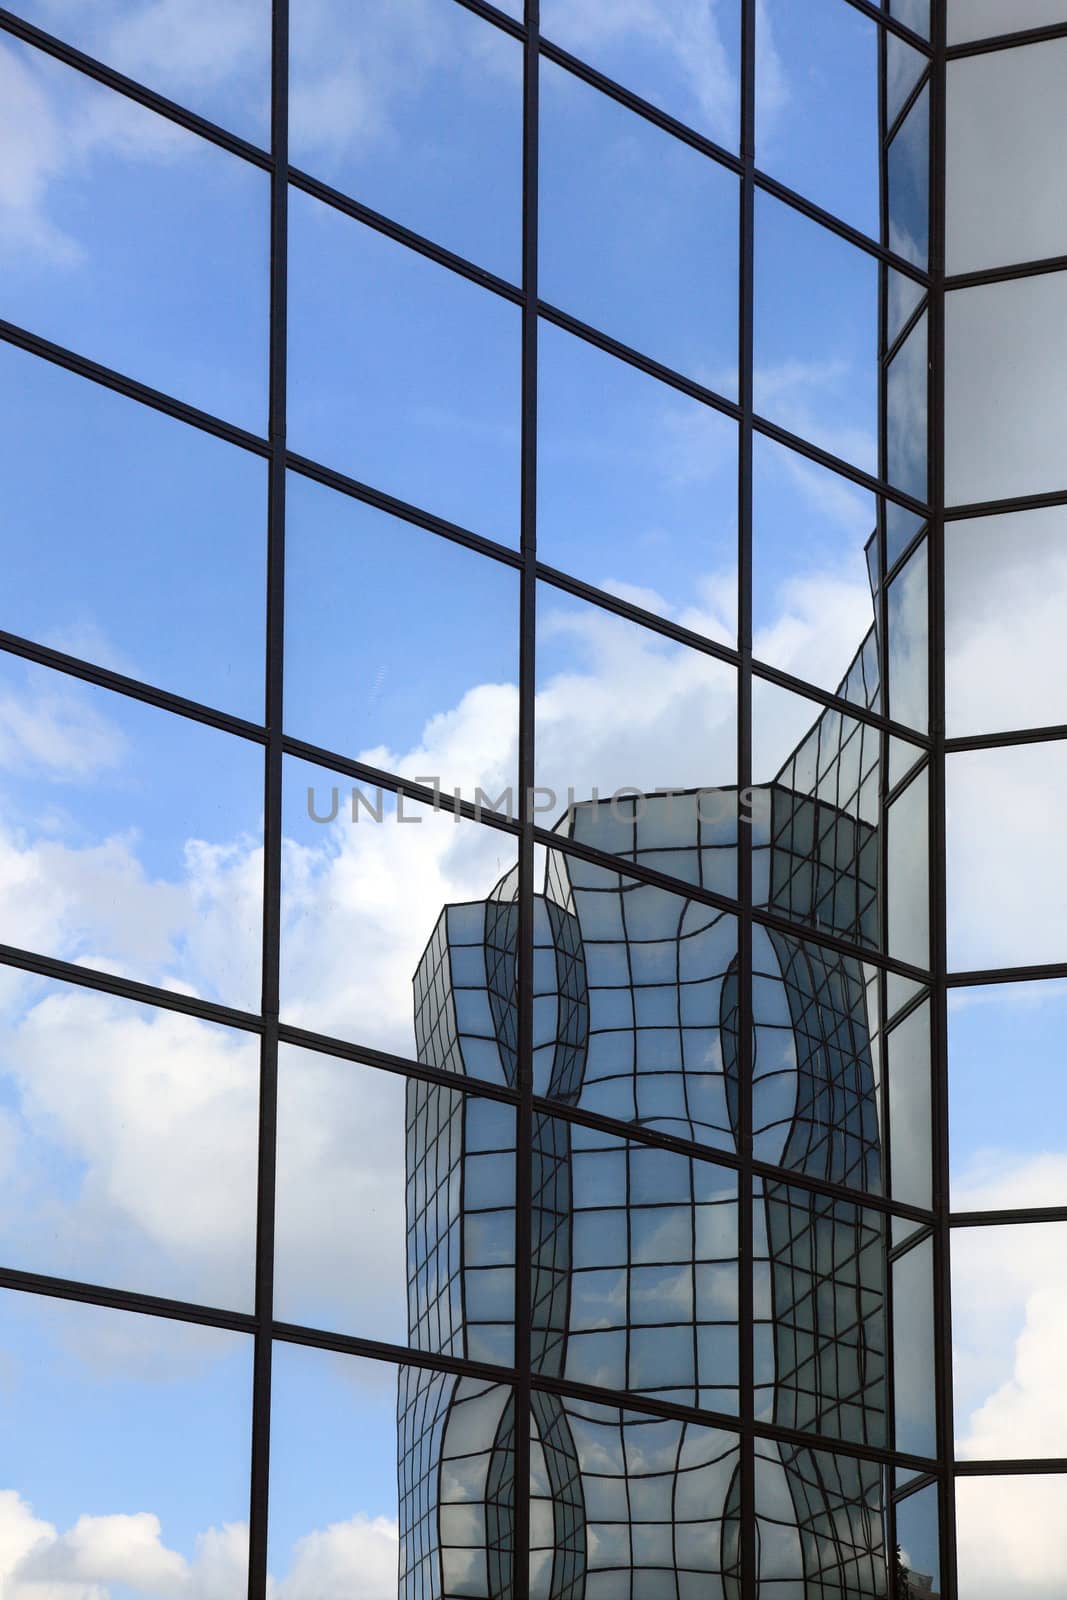 Glass and steel building reflected in glass wall